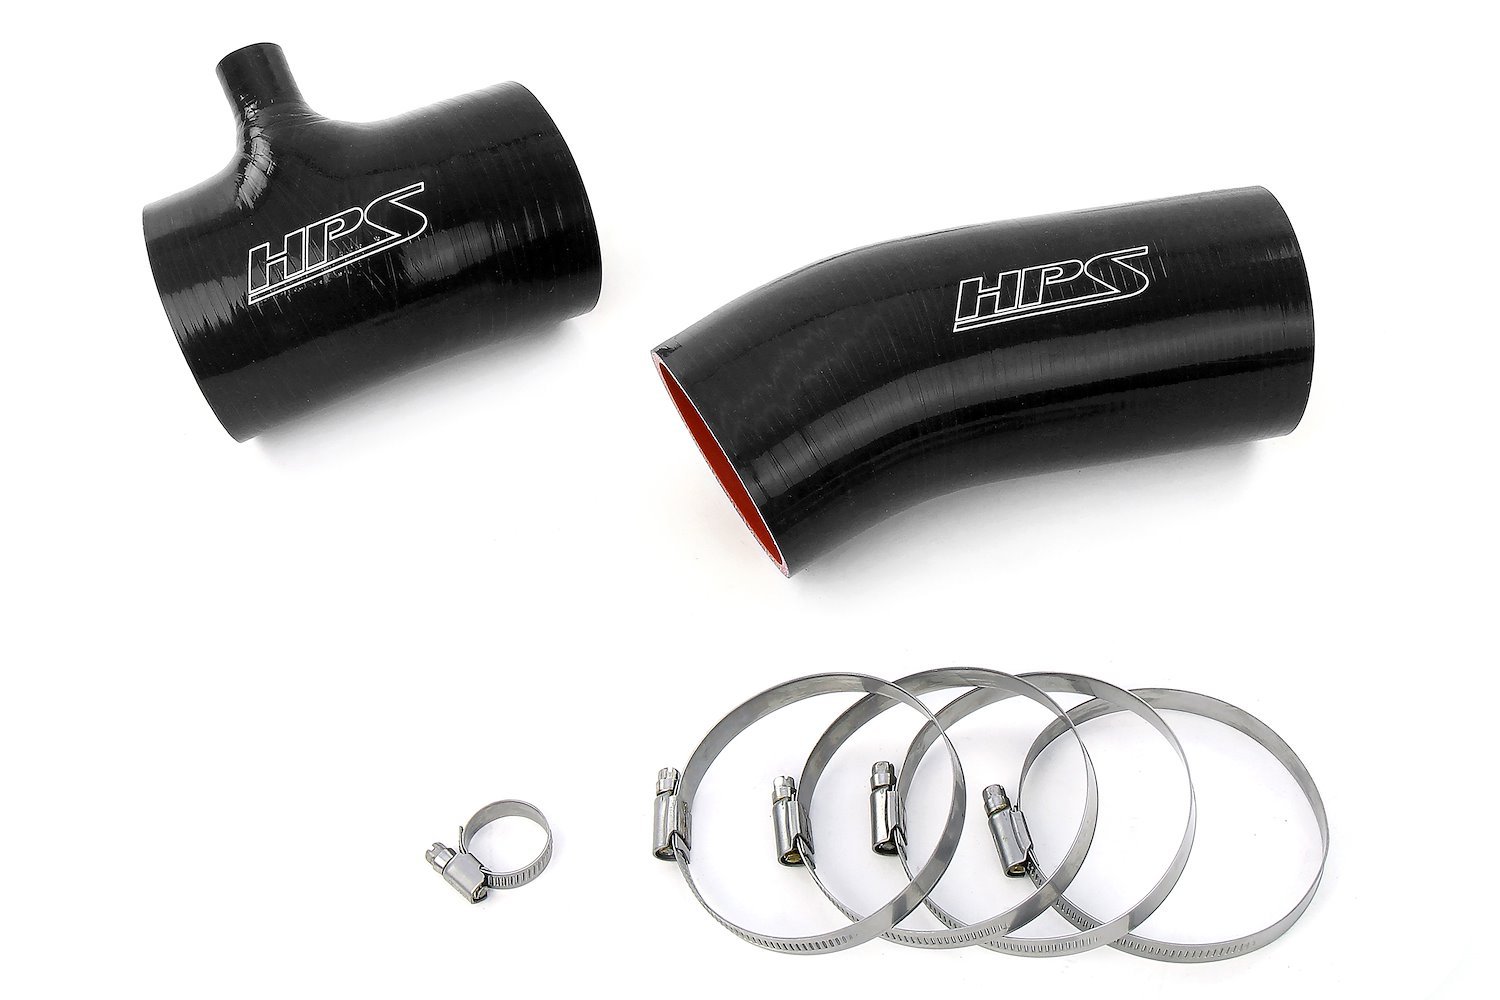 57-2104-BLK Silicone Air Intake Kit, Replace Stock Restrictive Air Intake, Improve Throttle Response, No Heat Soak